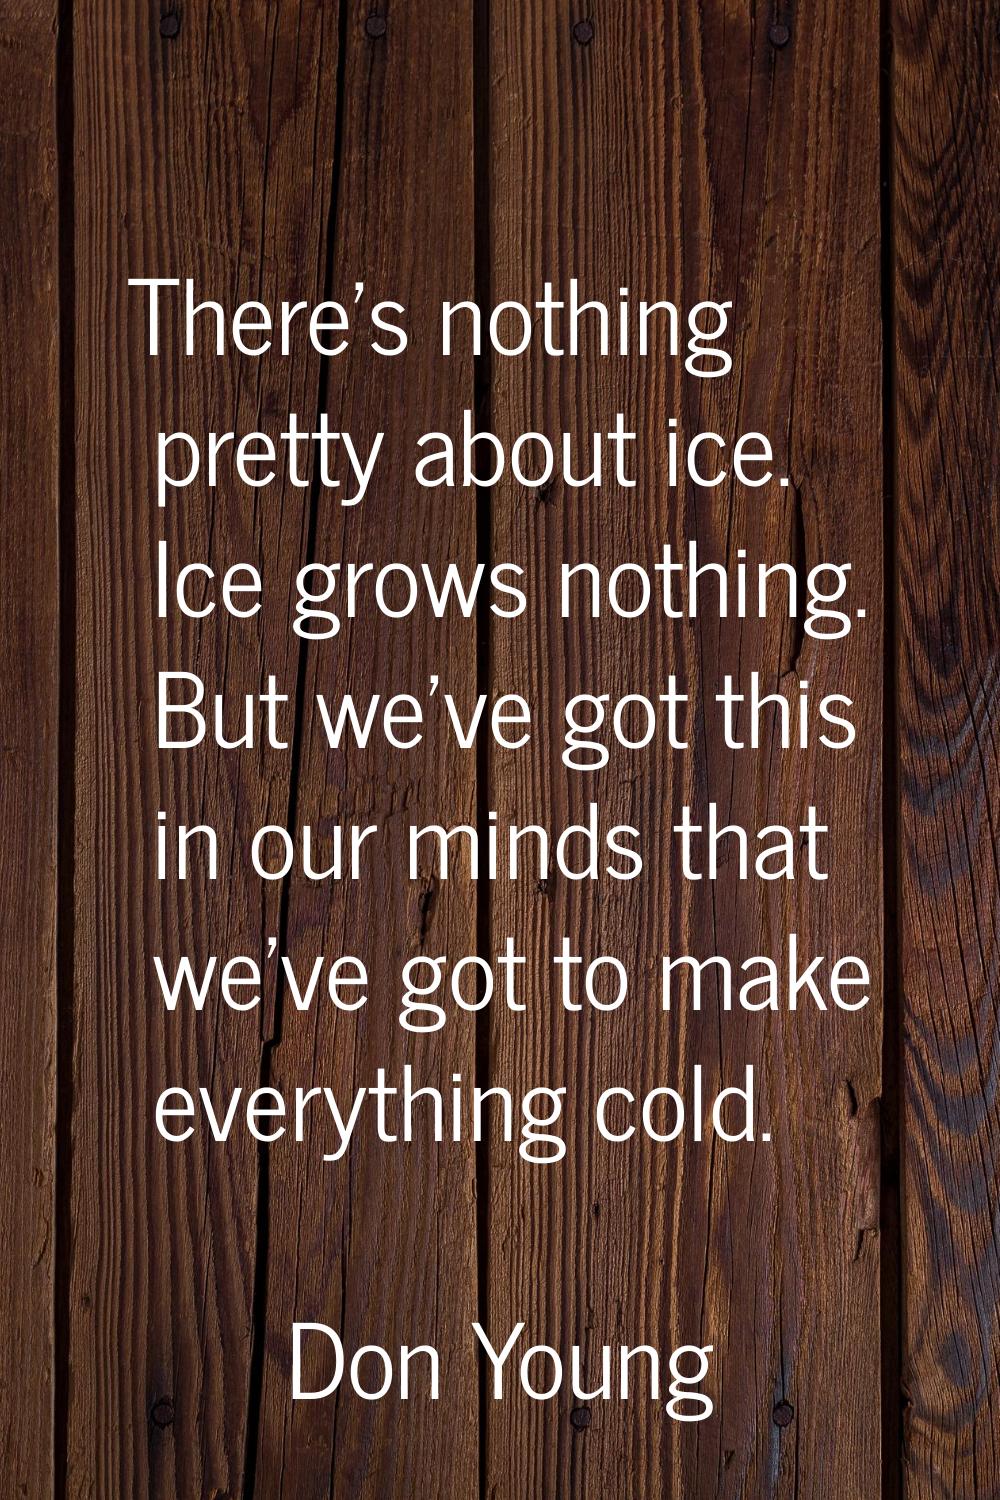 There's nothing pretty about ice. Ice grows nothing. But we've got this in our minds that we've got